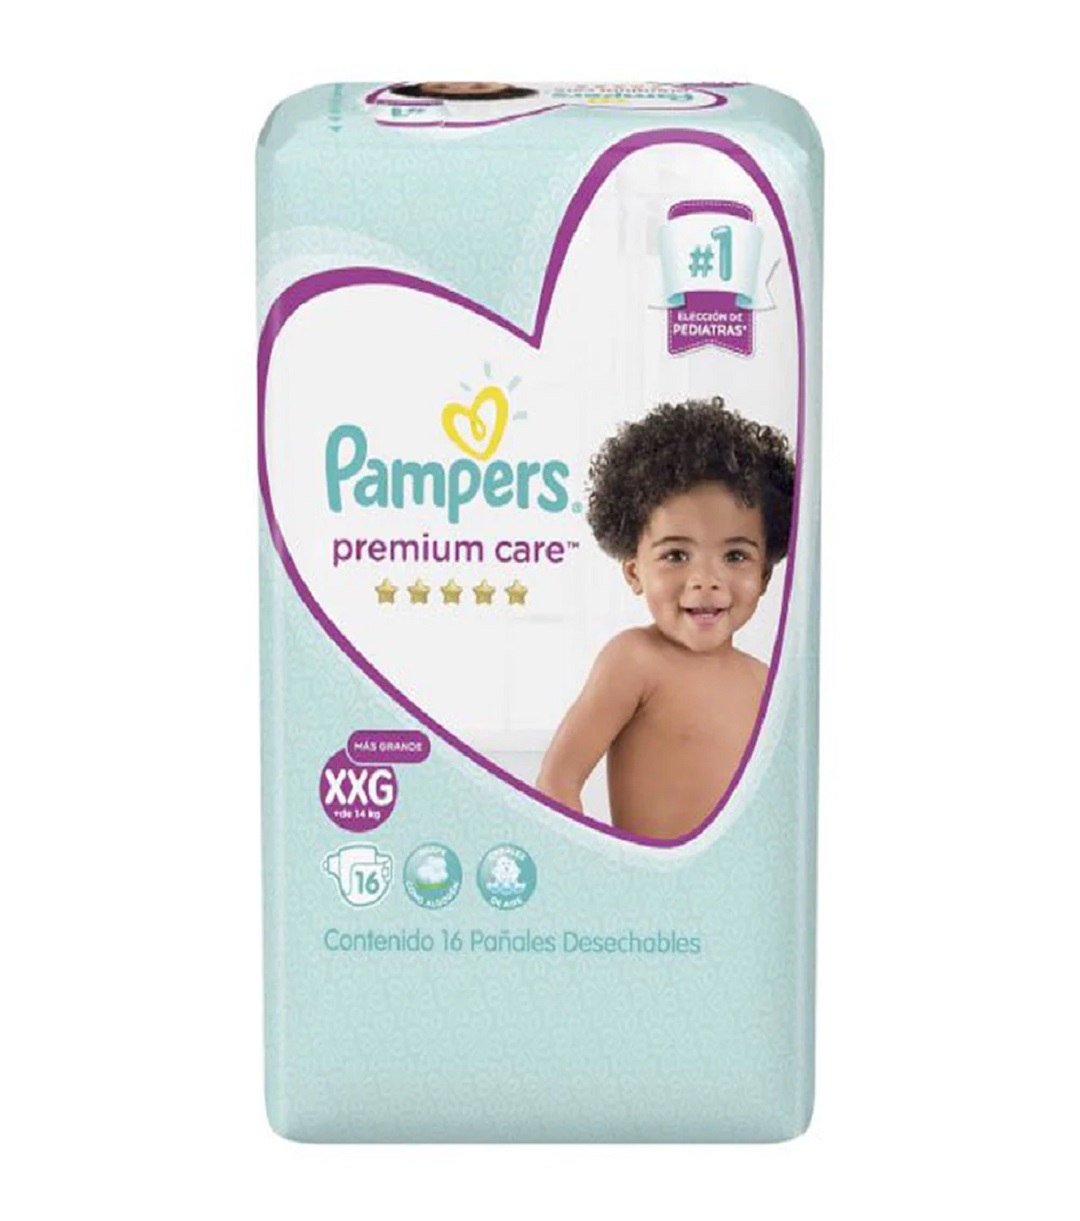 Pañal Pampers Premium Care XXG 16 unds